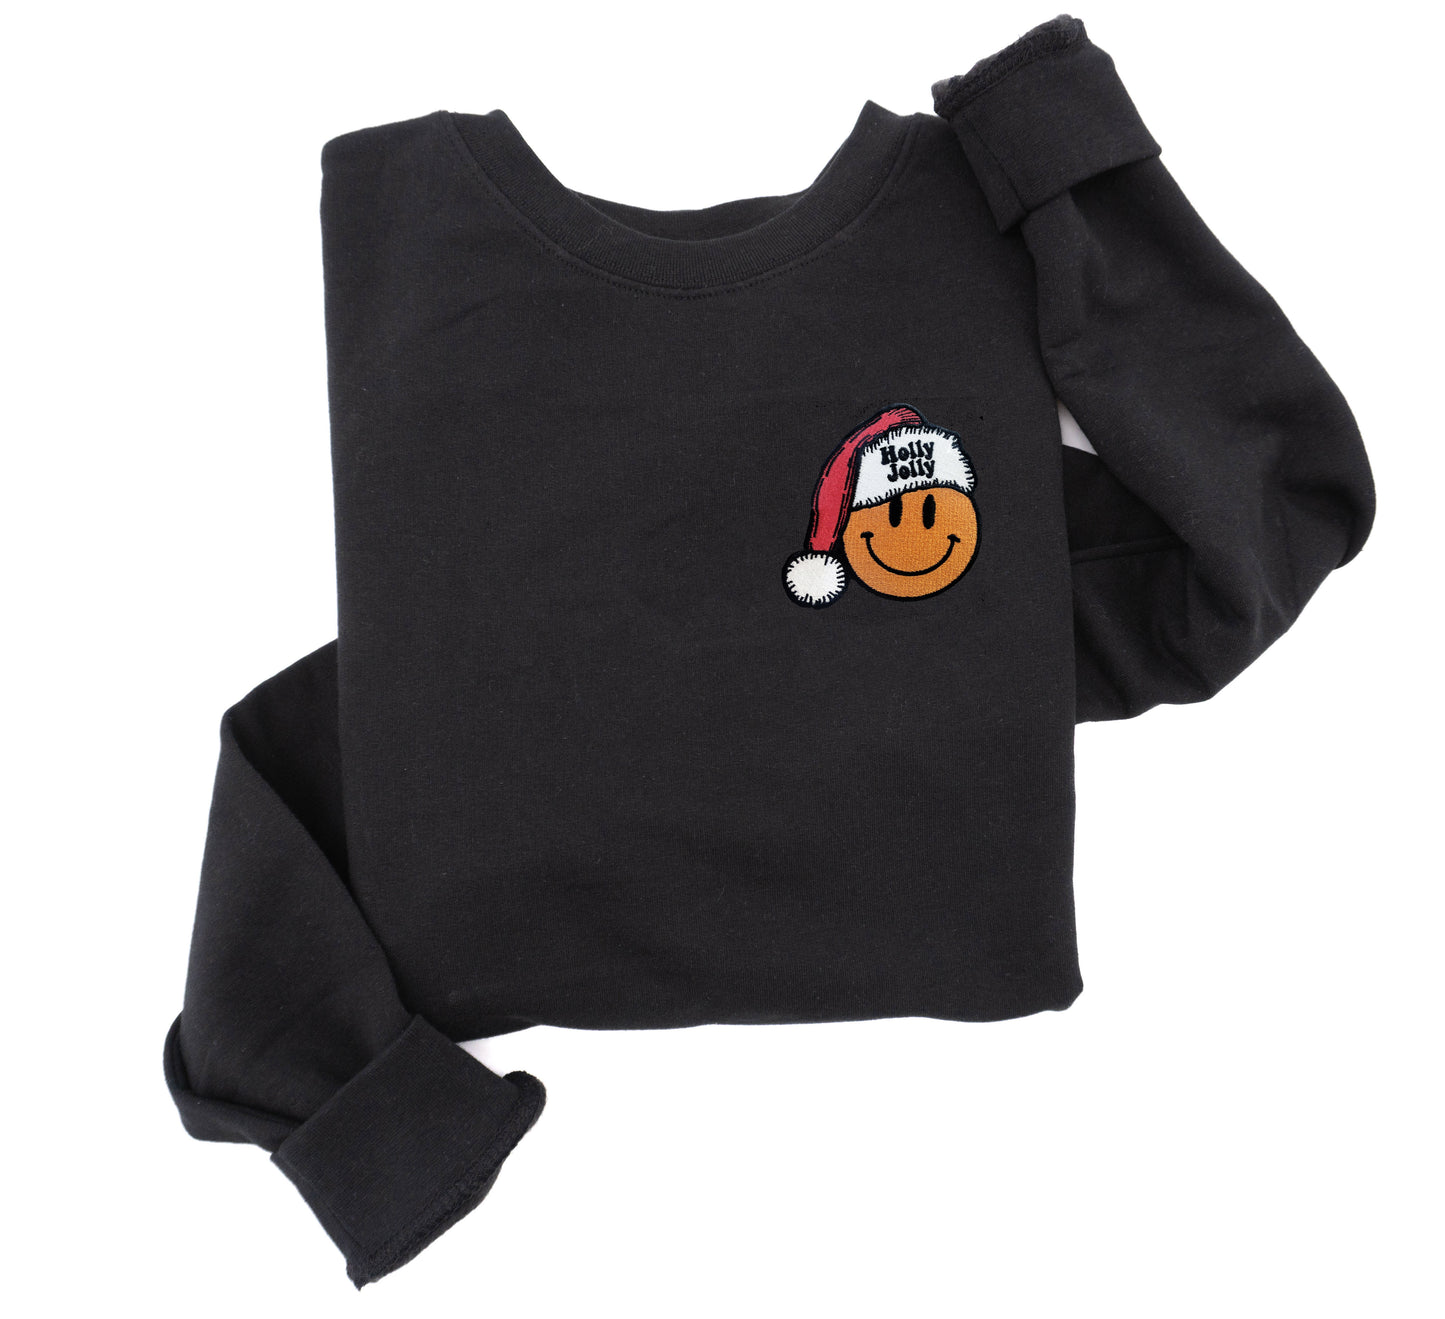 Holly Jolly Smiley - Embroidered Sweatshirt (Black)